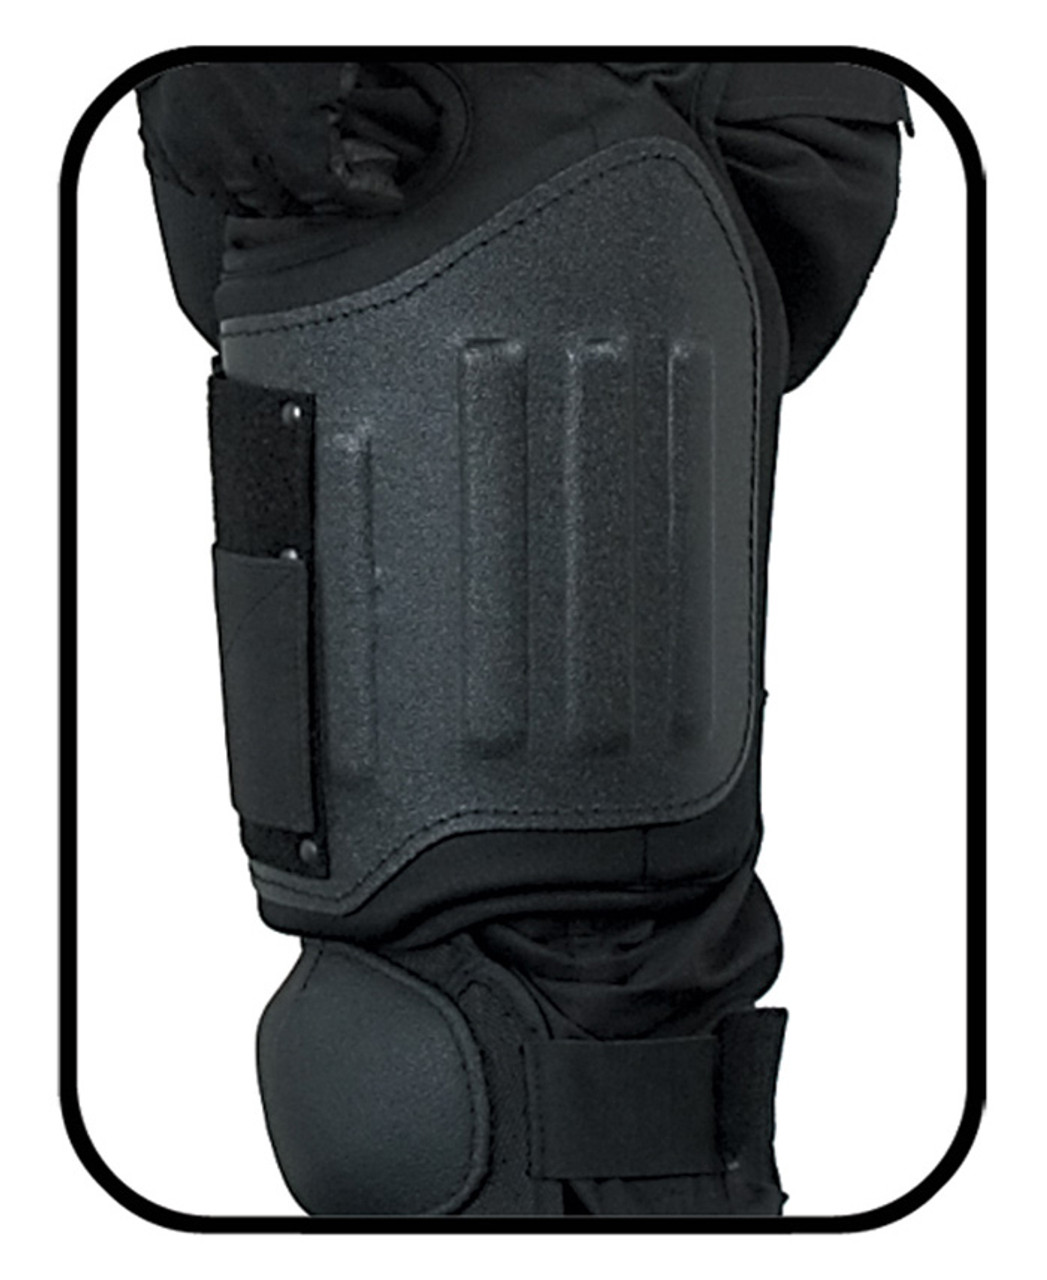 Damascus FX-1 Flex-Force Police Riot Gear Protective Suit, a complete set except the helmet that includes upper body, shoulder, forearm, groin, thigh, knee and shin protection, also includes a Gear Bag